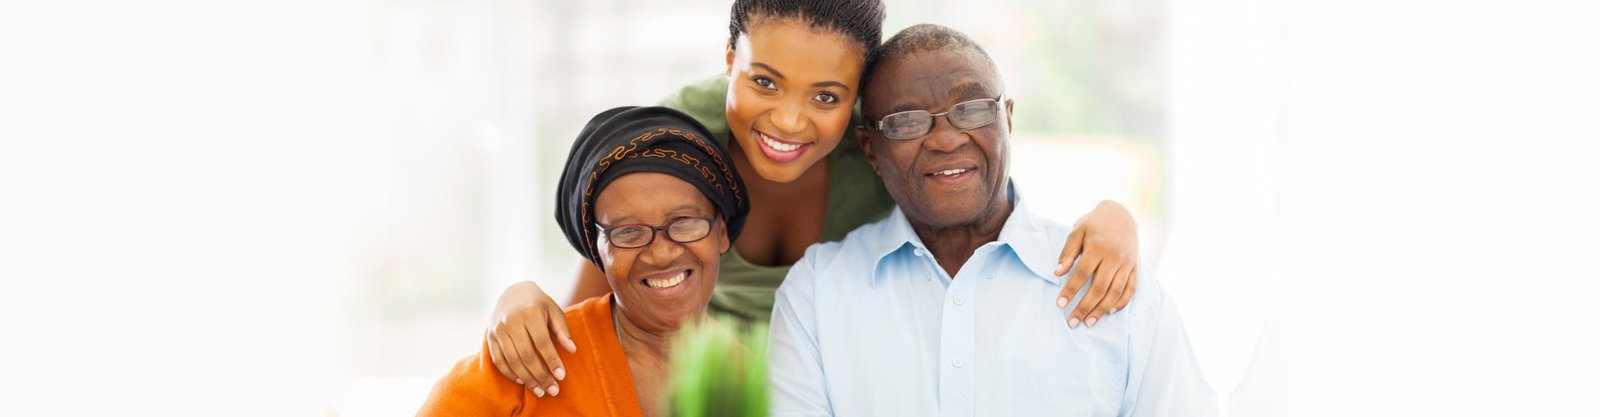 senior couple and adult woman smiling